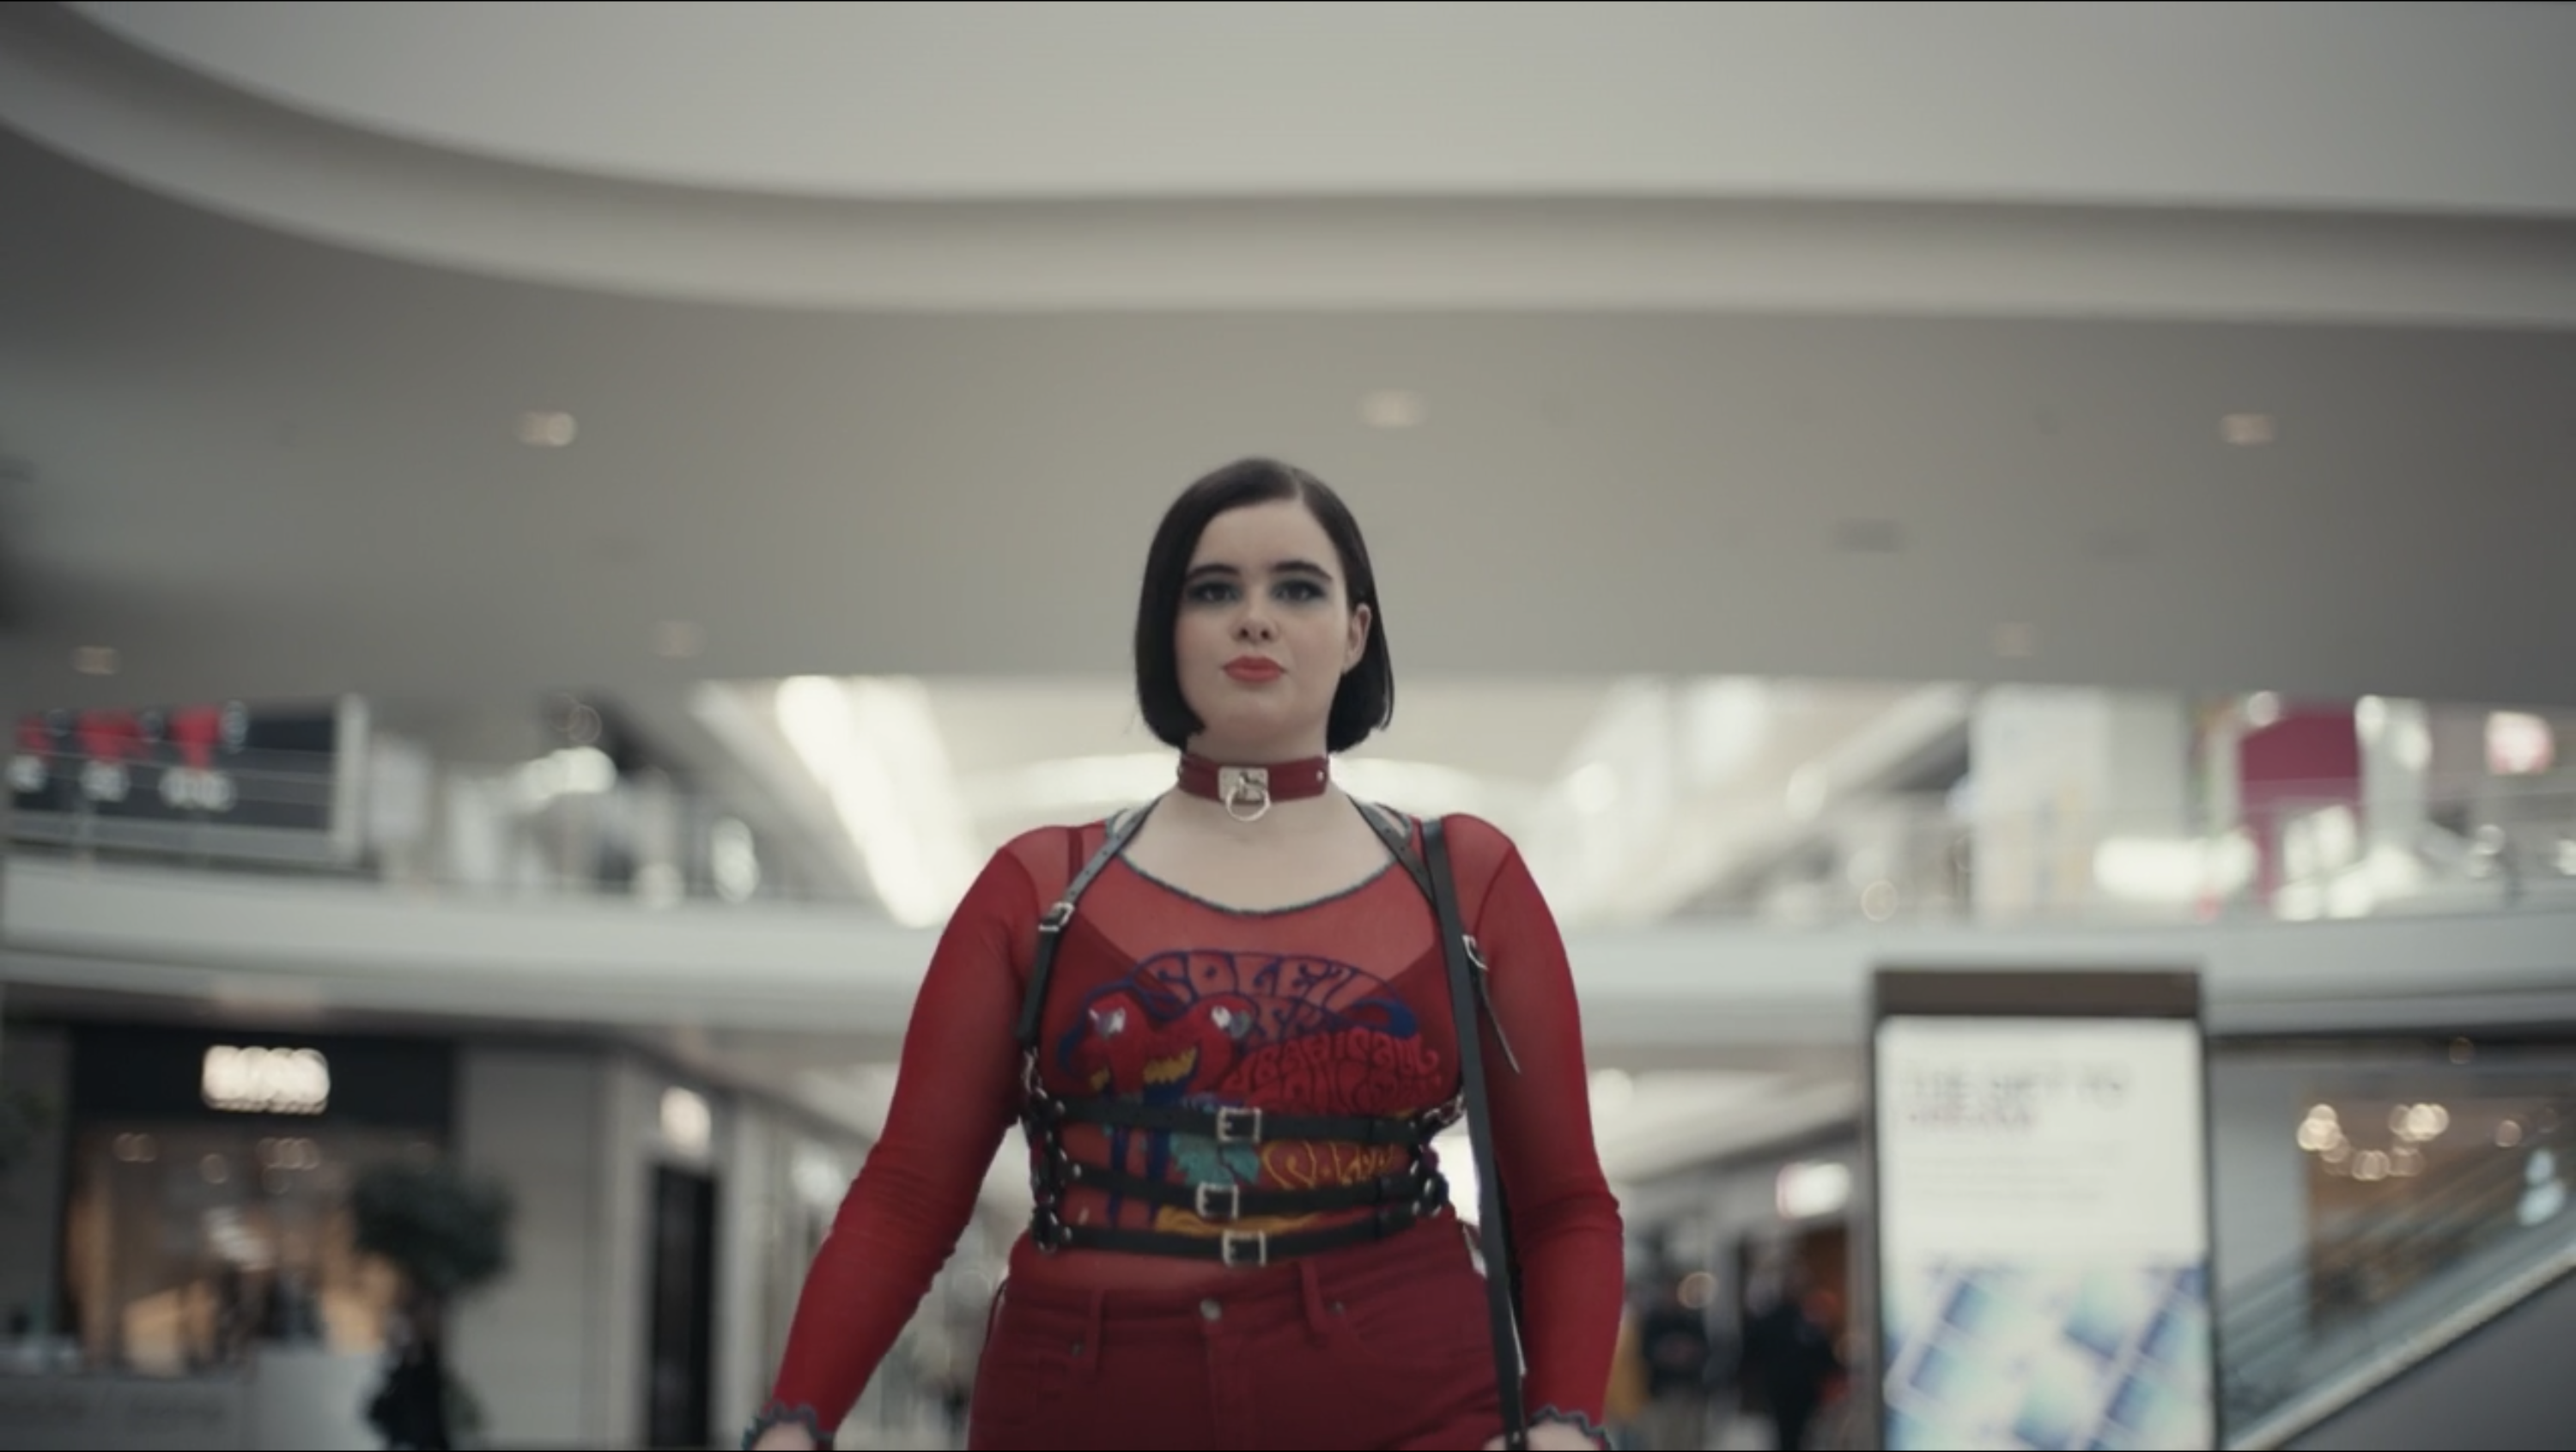 Barbie Ferreira as Kat walks confidently in her new clothes and attitude in &quot;Euphoria&quot;